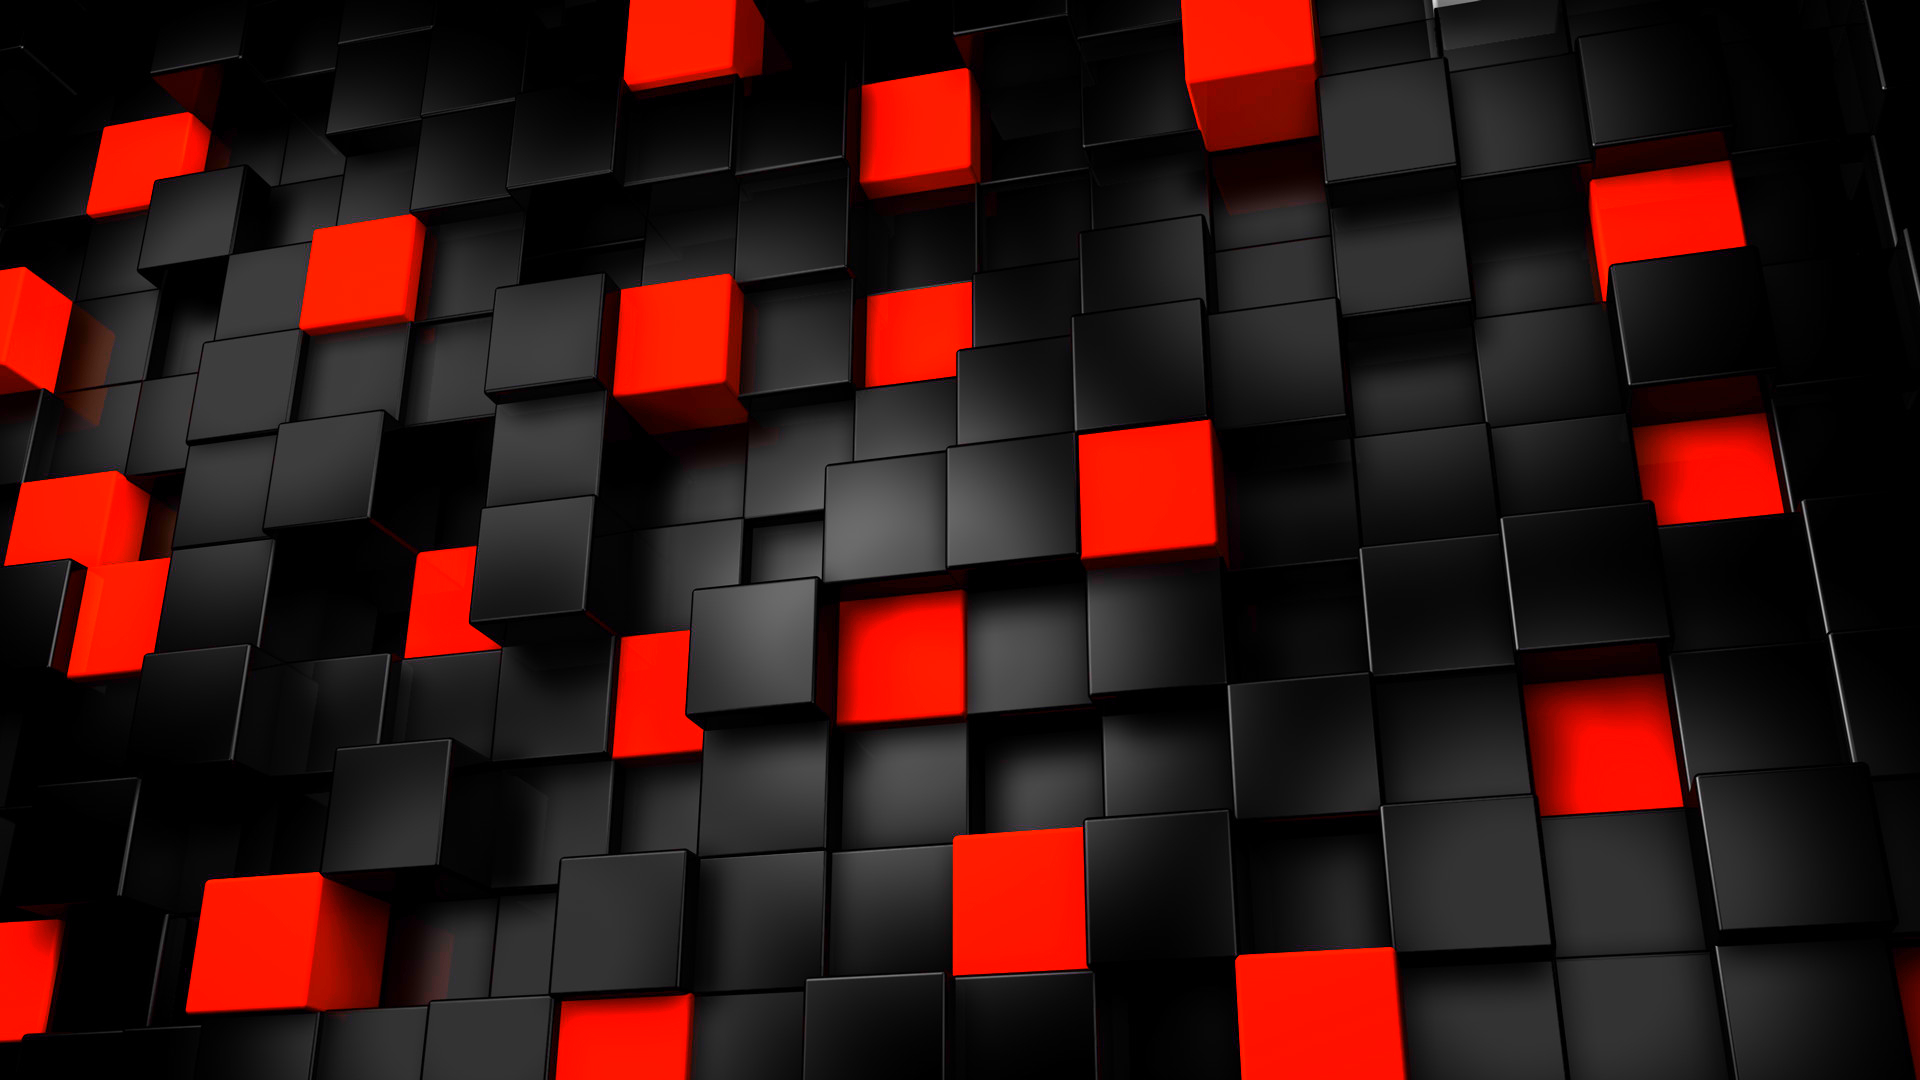 Red Black And Silver Wallpaper 10 Desktop Wallpaper - Hd Backgrounds Red And Black - HD Wallpaper 